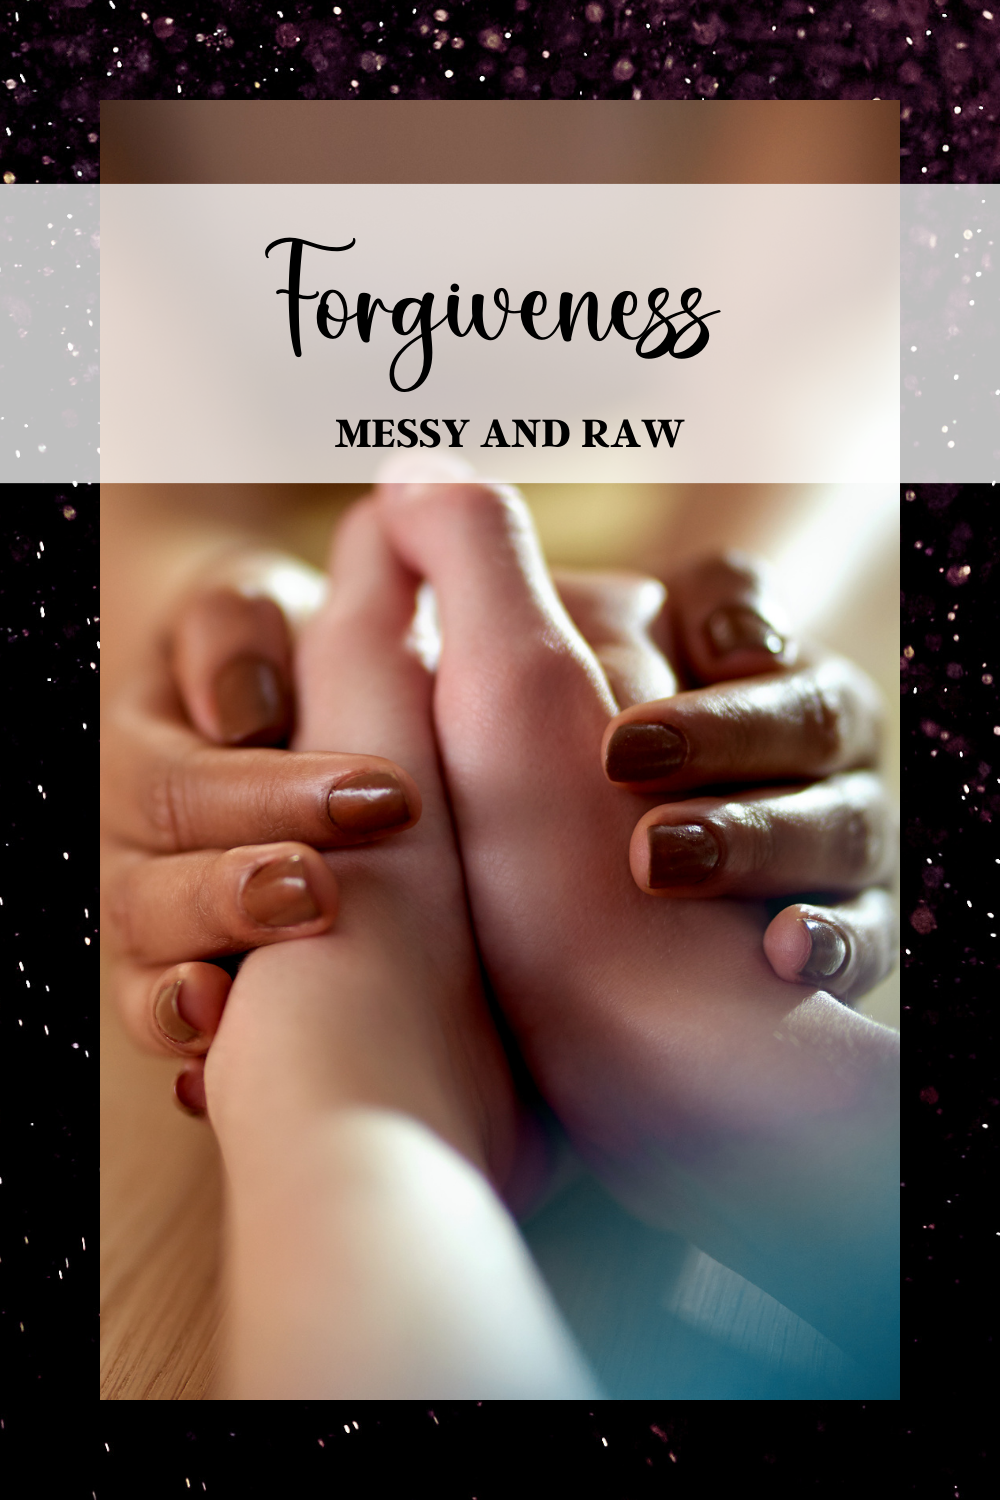 Forgiveness - messy and raw